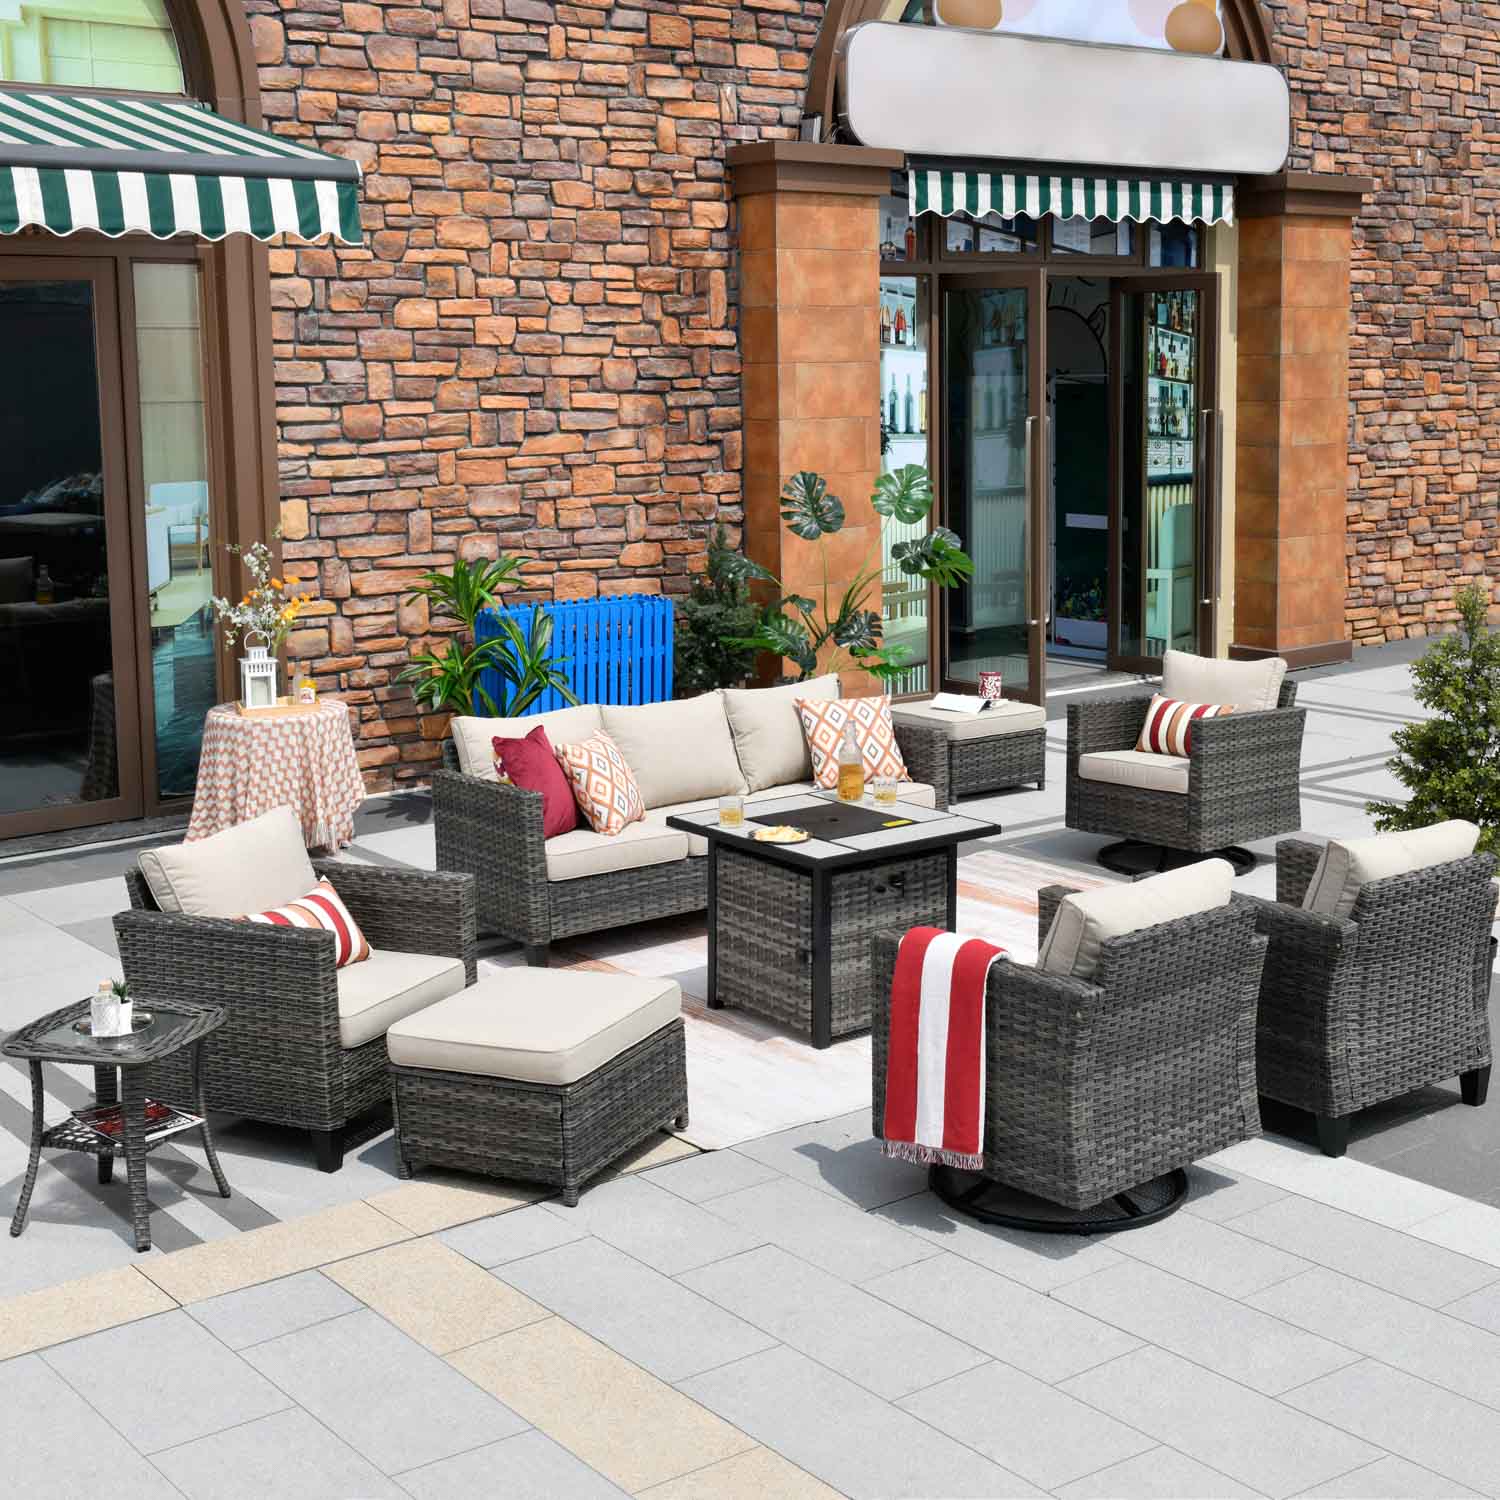 Ovios Patio Vultros 9-Piece Set with 2 Swivel Chairs and 30'' Propane Fire Pit Table